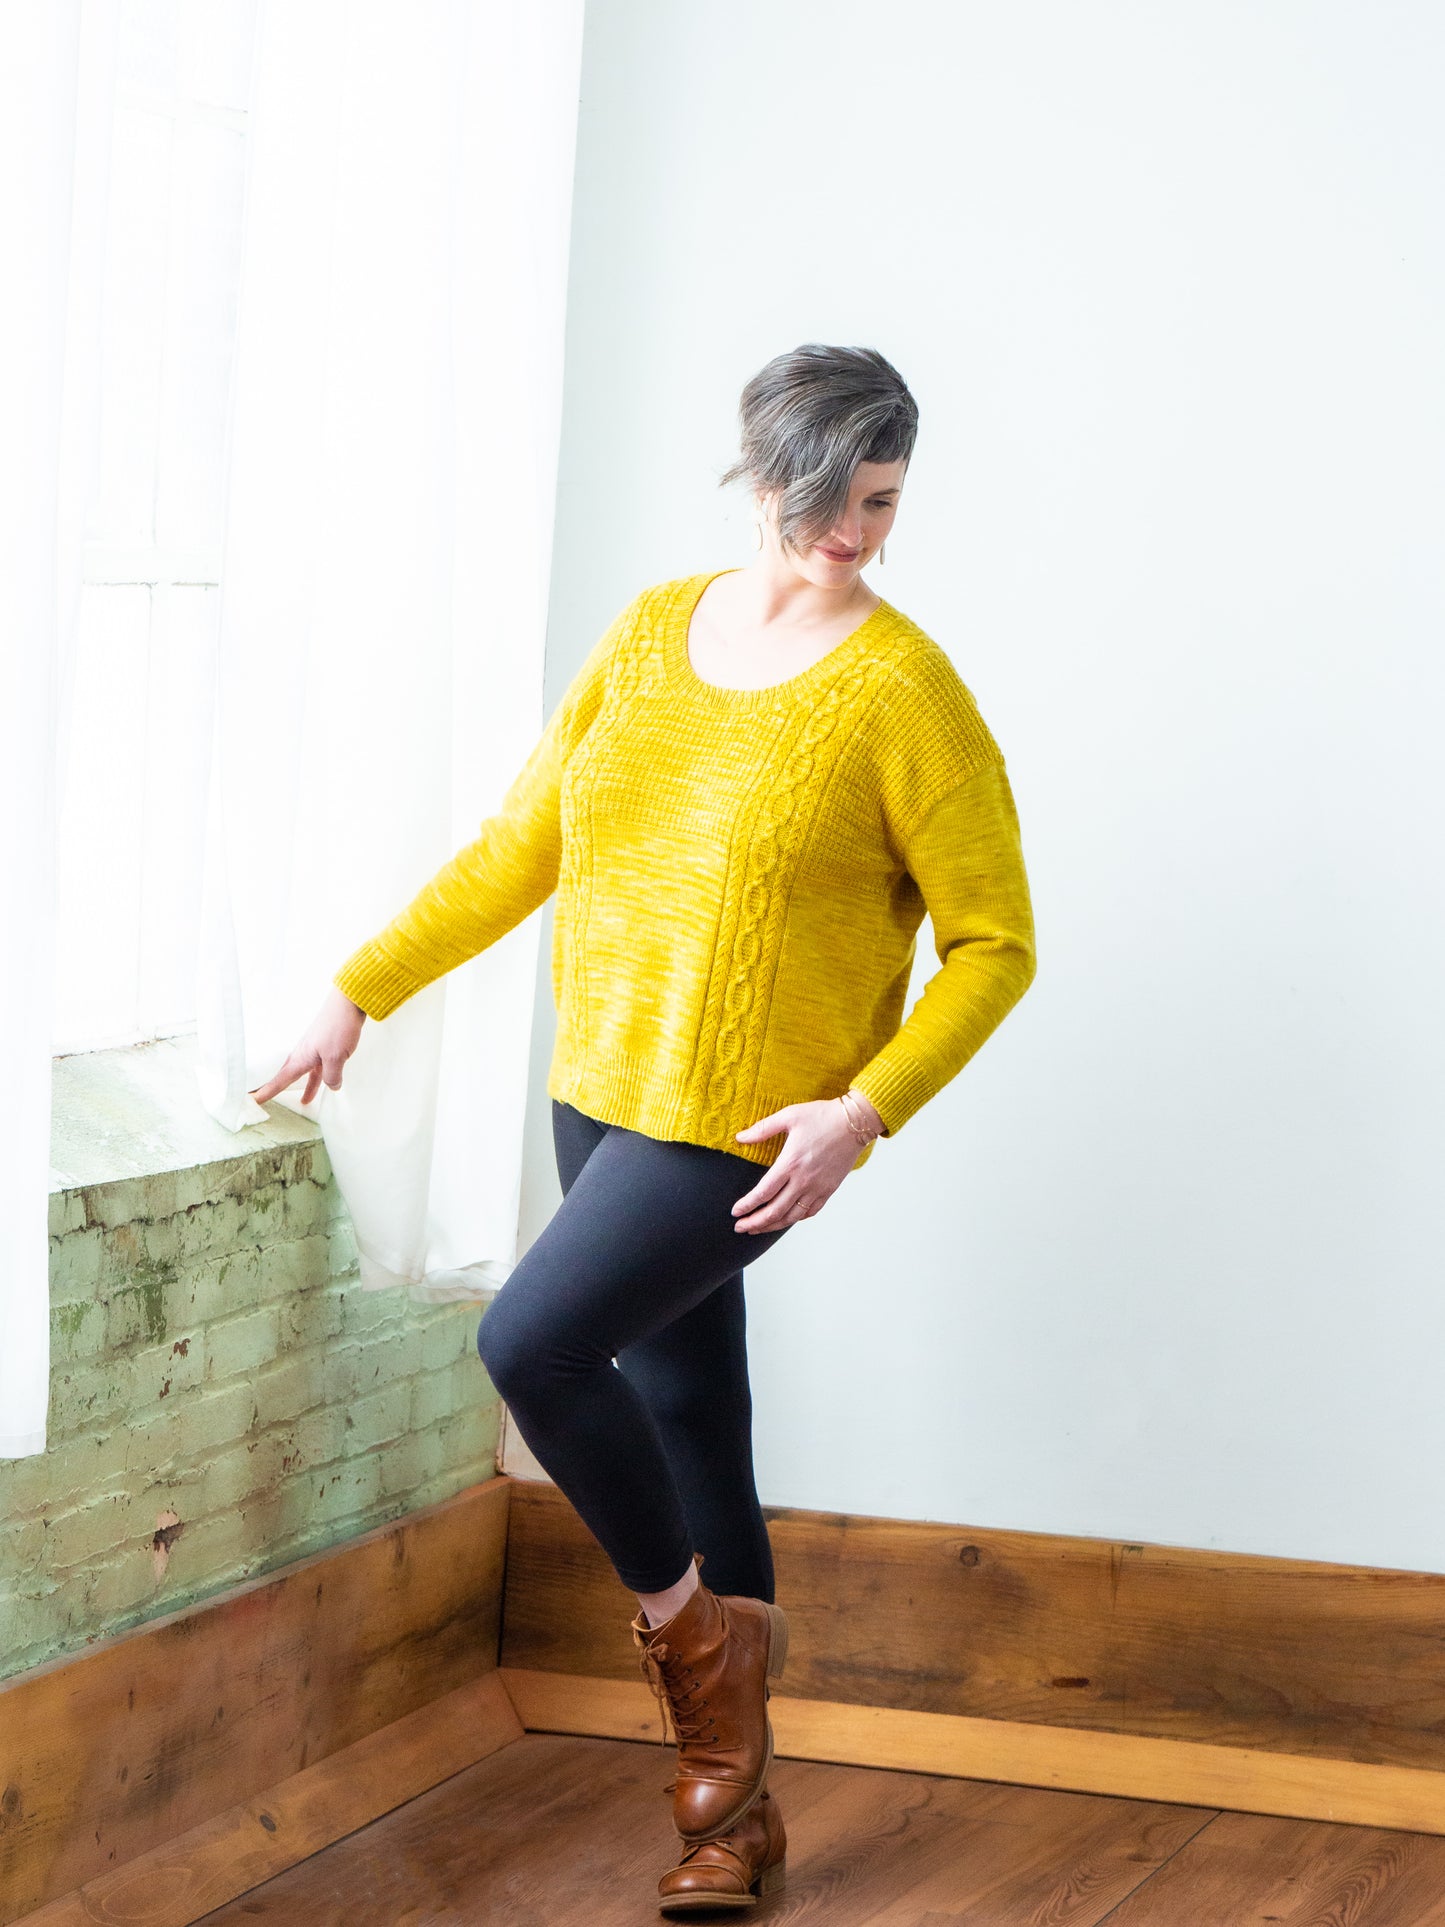 Jen wears a bright yellow sweater with blue pants and brown boots. The sweater is knit with a scoop neck and cabled strips.